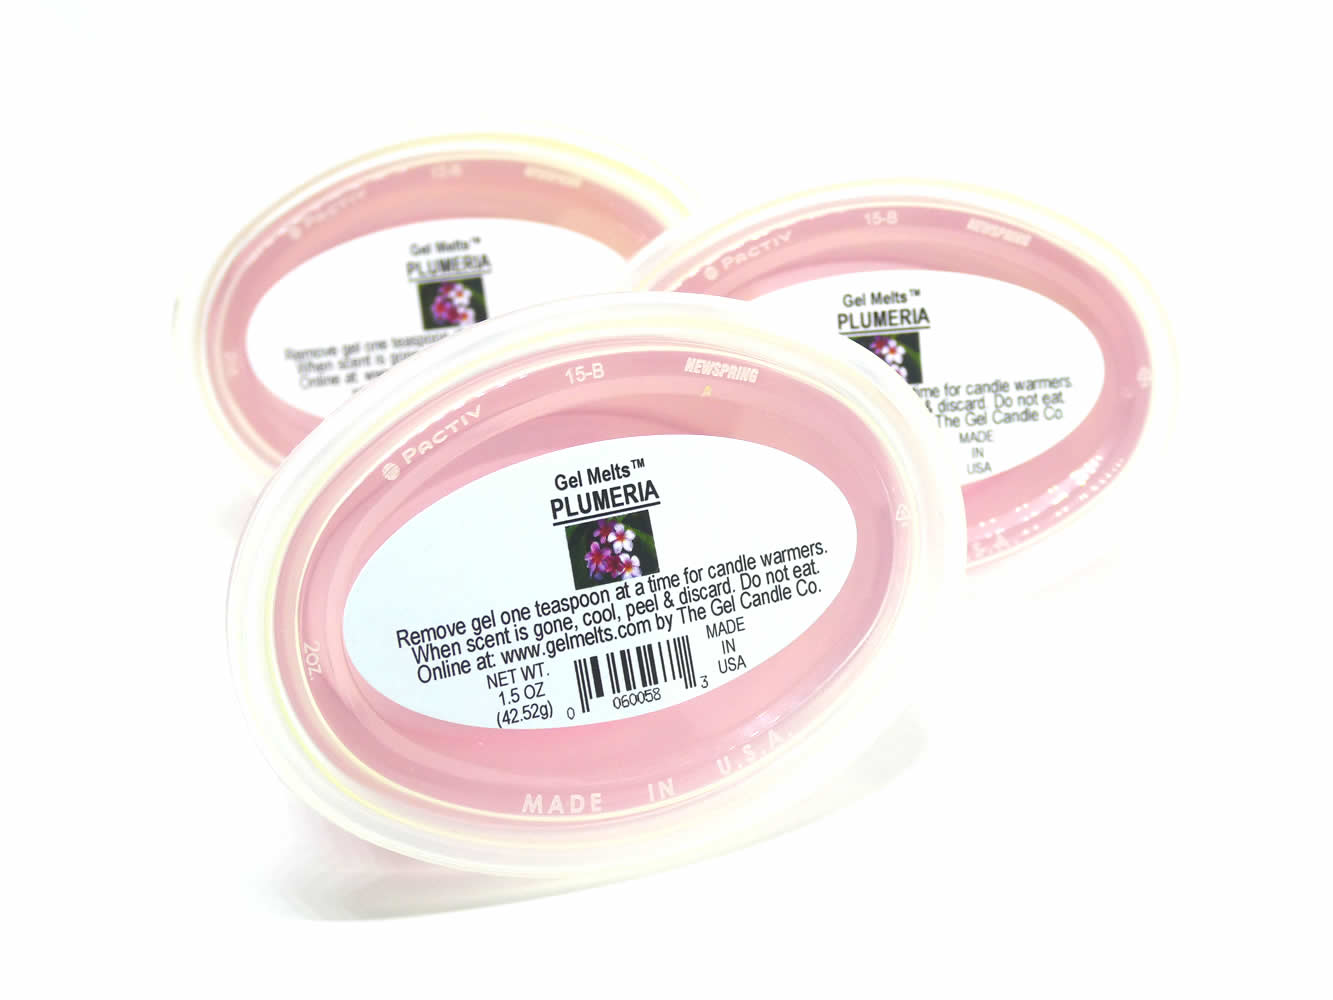 Plumeria scented Gel Melts™ Gel Wax for warmers - 3 pack